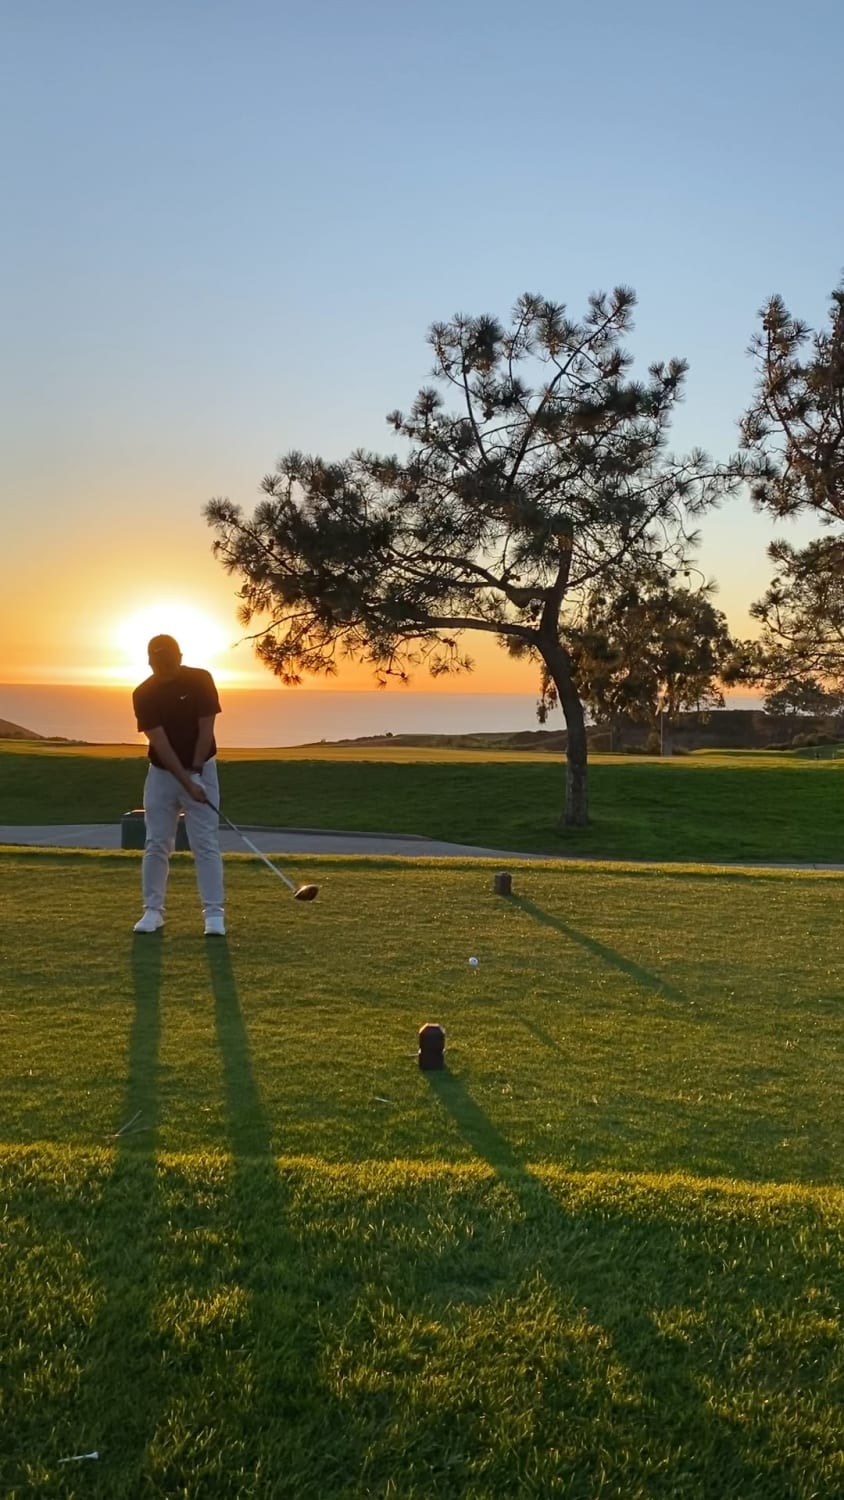 Walked Torrey Pines South for my birthday with my fam, what a sunset we were treated to!